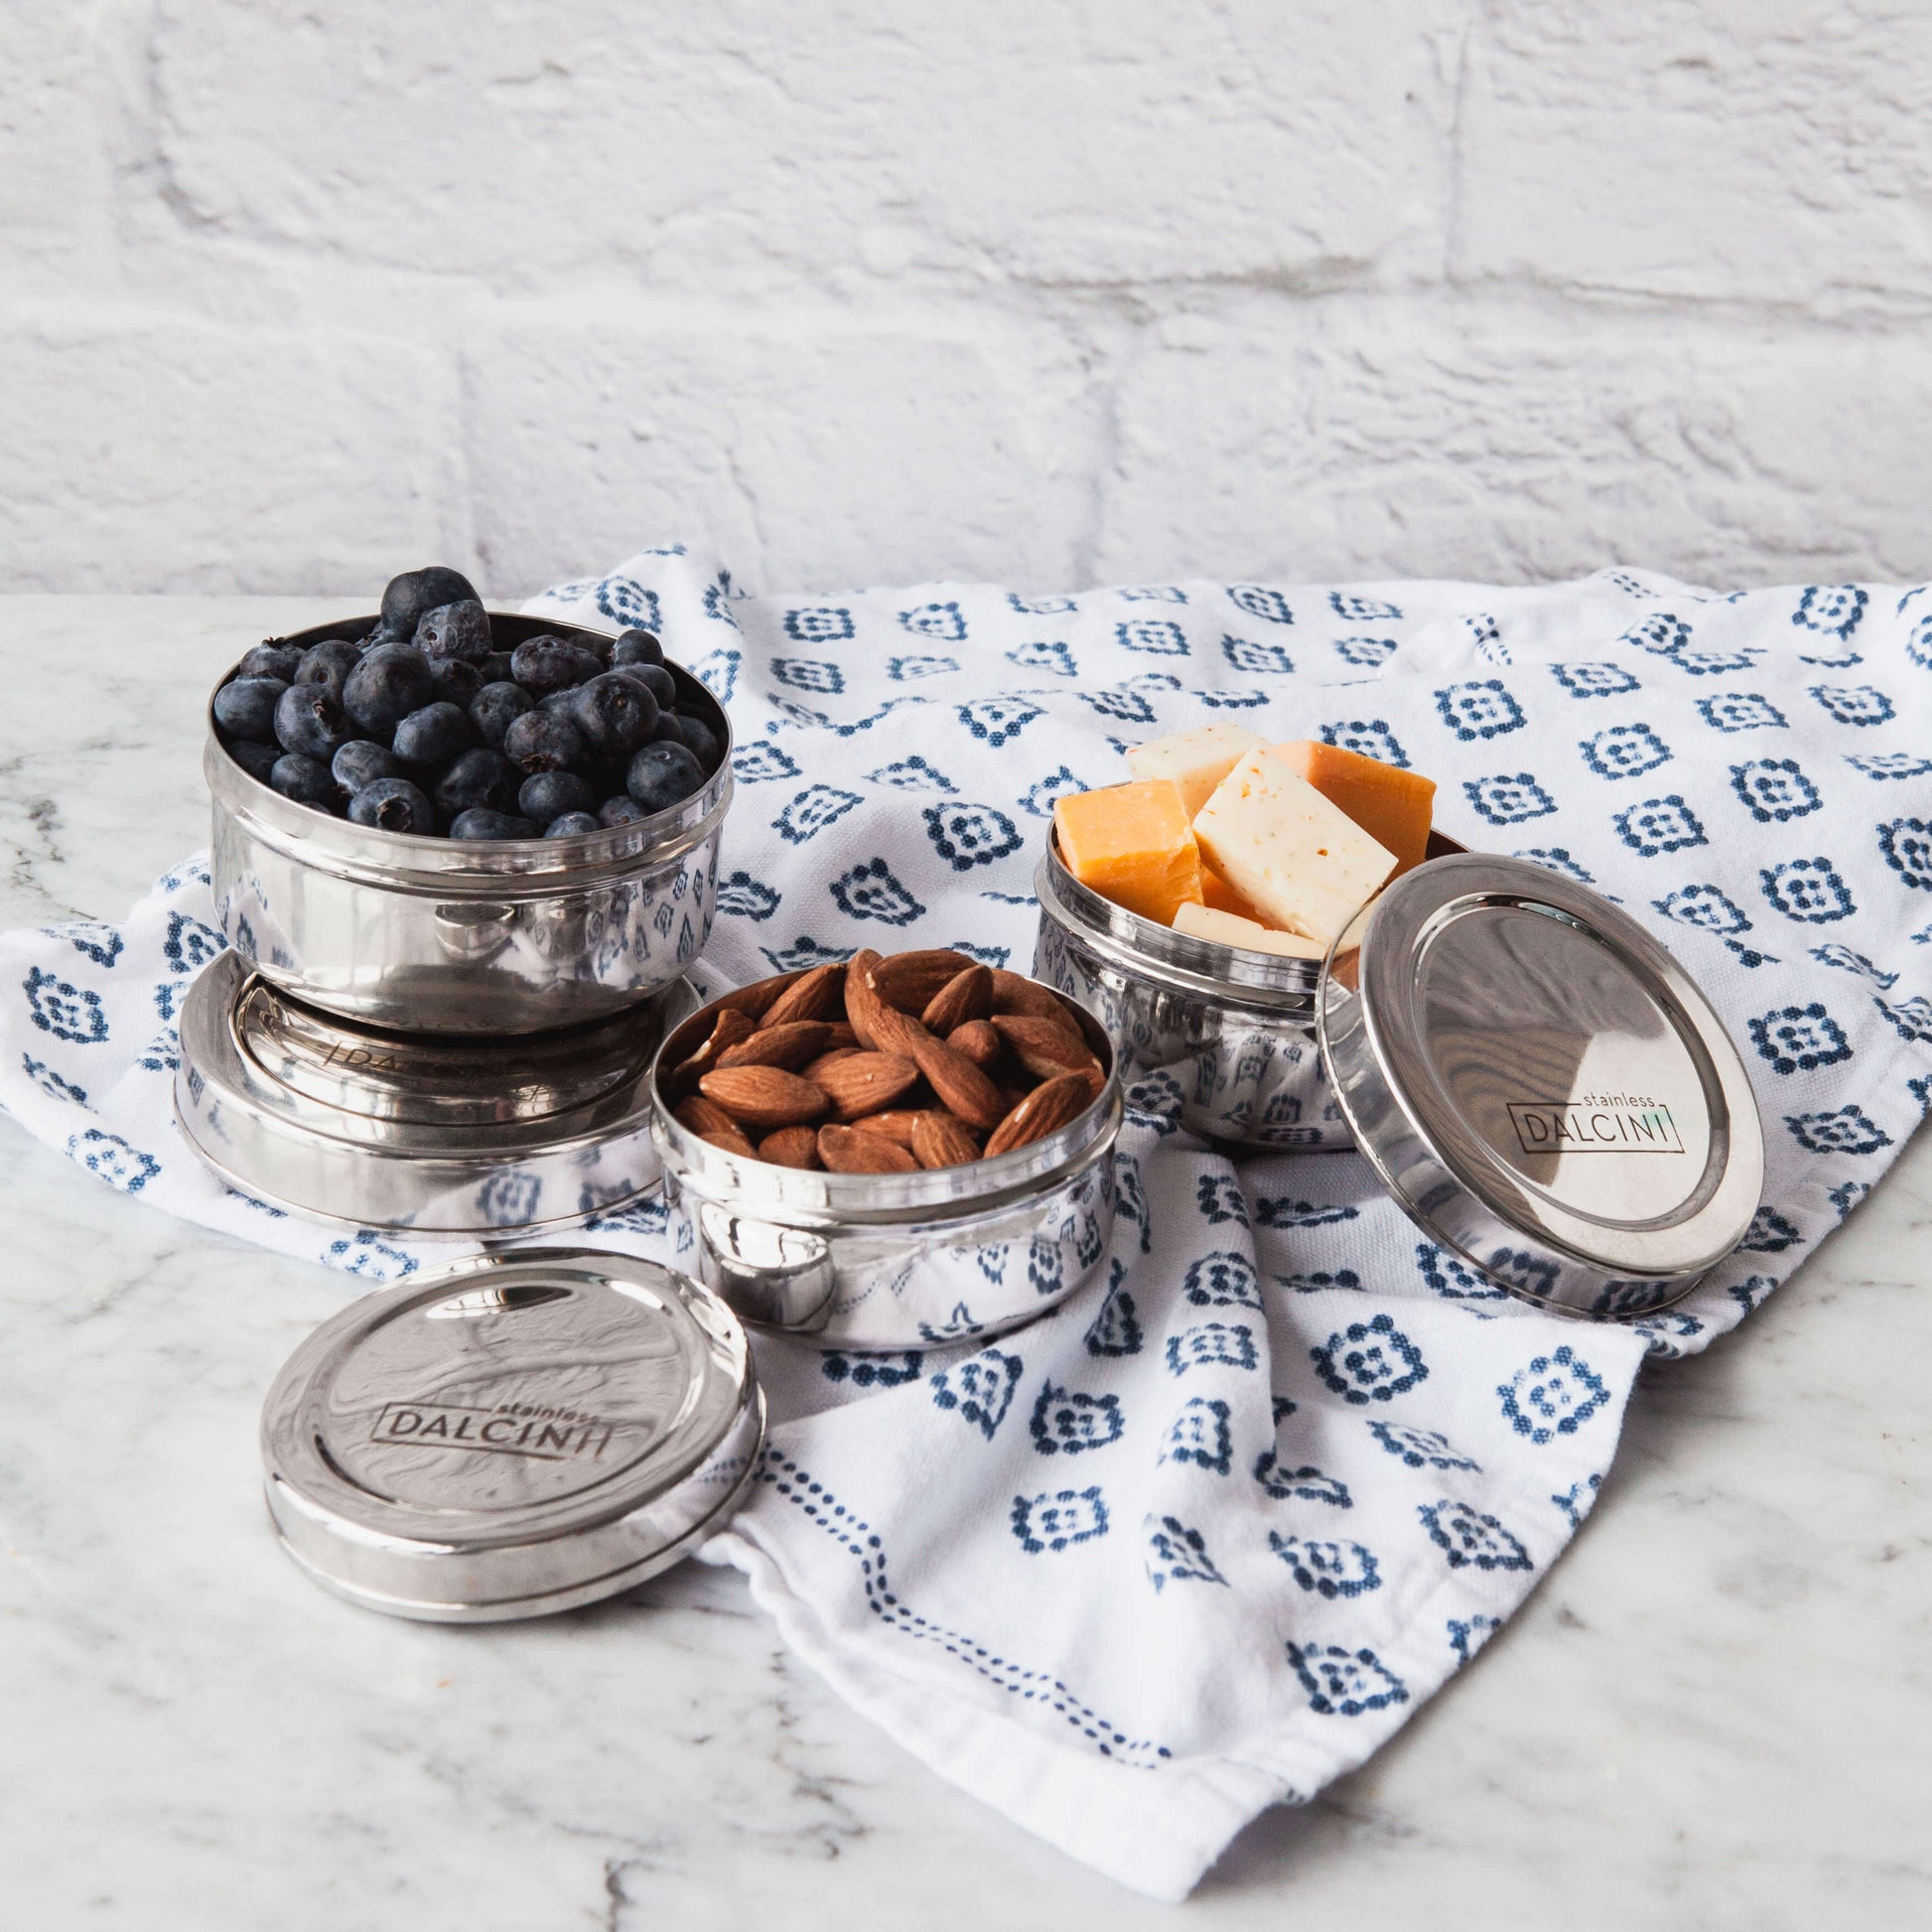 almonds, blueberries, and cheese in 3 round stainless steel snack boxes on a kitchen cloth